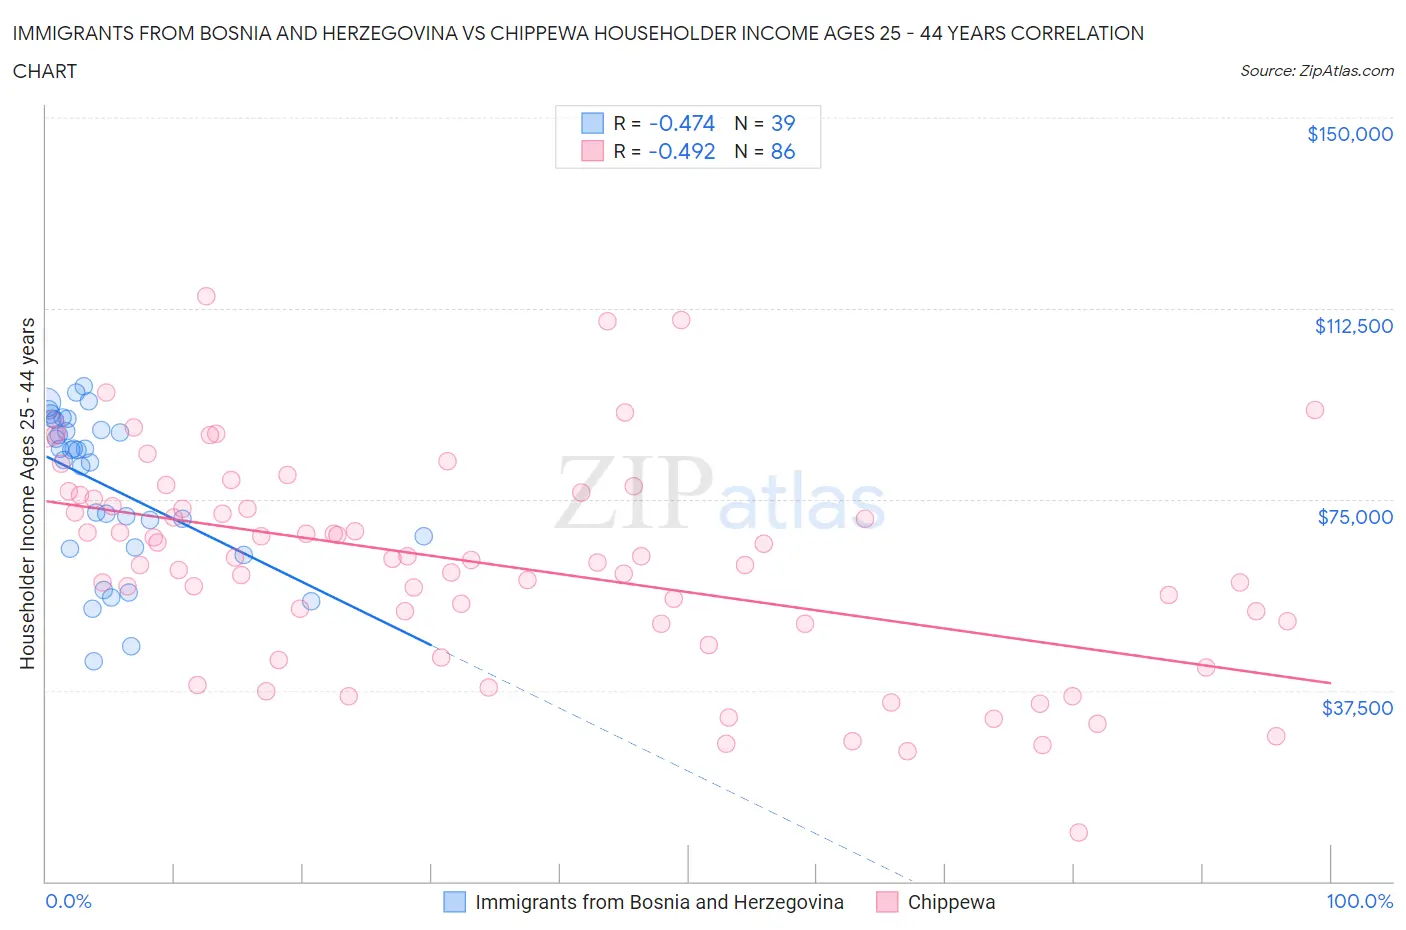 Immigrants from Bosnia and Herzegovina vs Chippewa Householder Income Ages 25 - 44 years